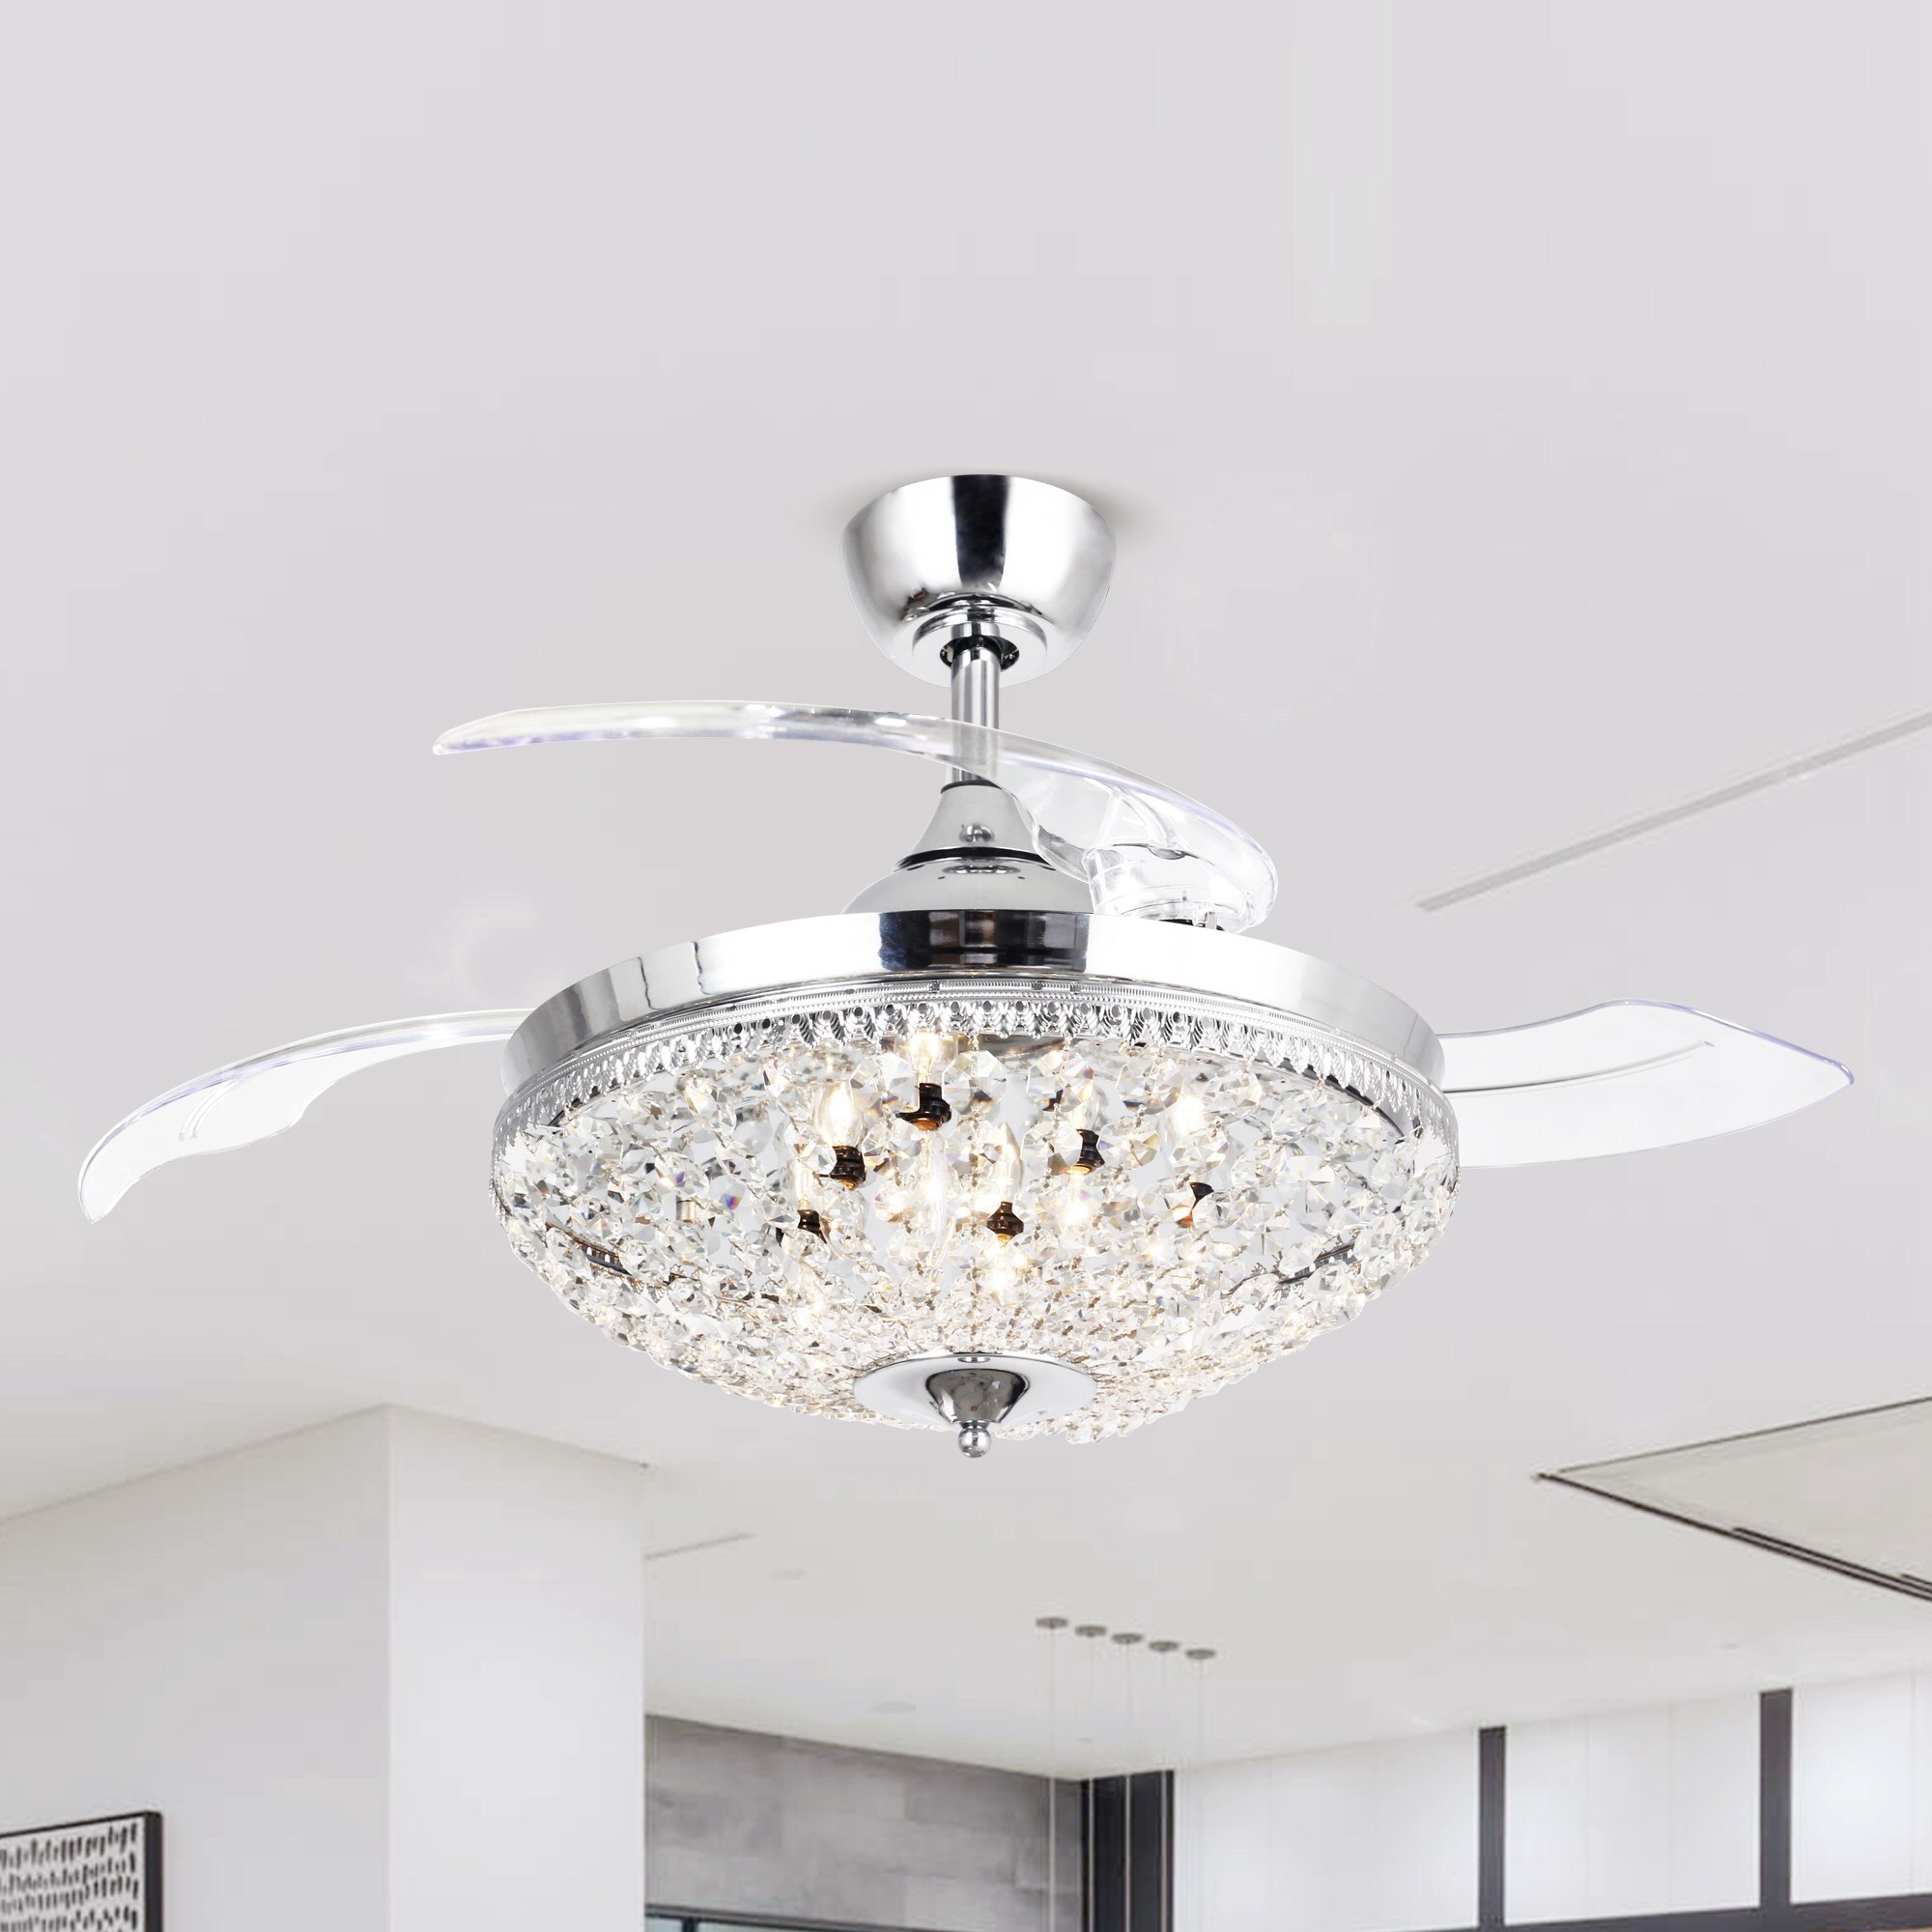 42 Modern Crystal Ceiling Fan with Light Retractable Blades Chandelier Fans LED Light Kit Include Crystal Ceiling Fan Light with Remote 3 Speeds and Light Changes Polished Chrome 